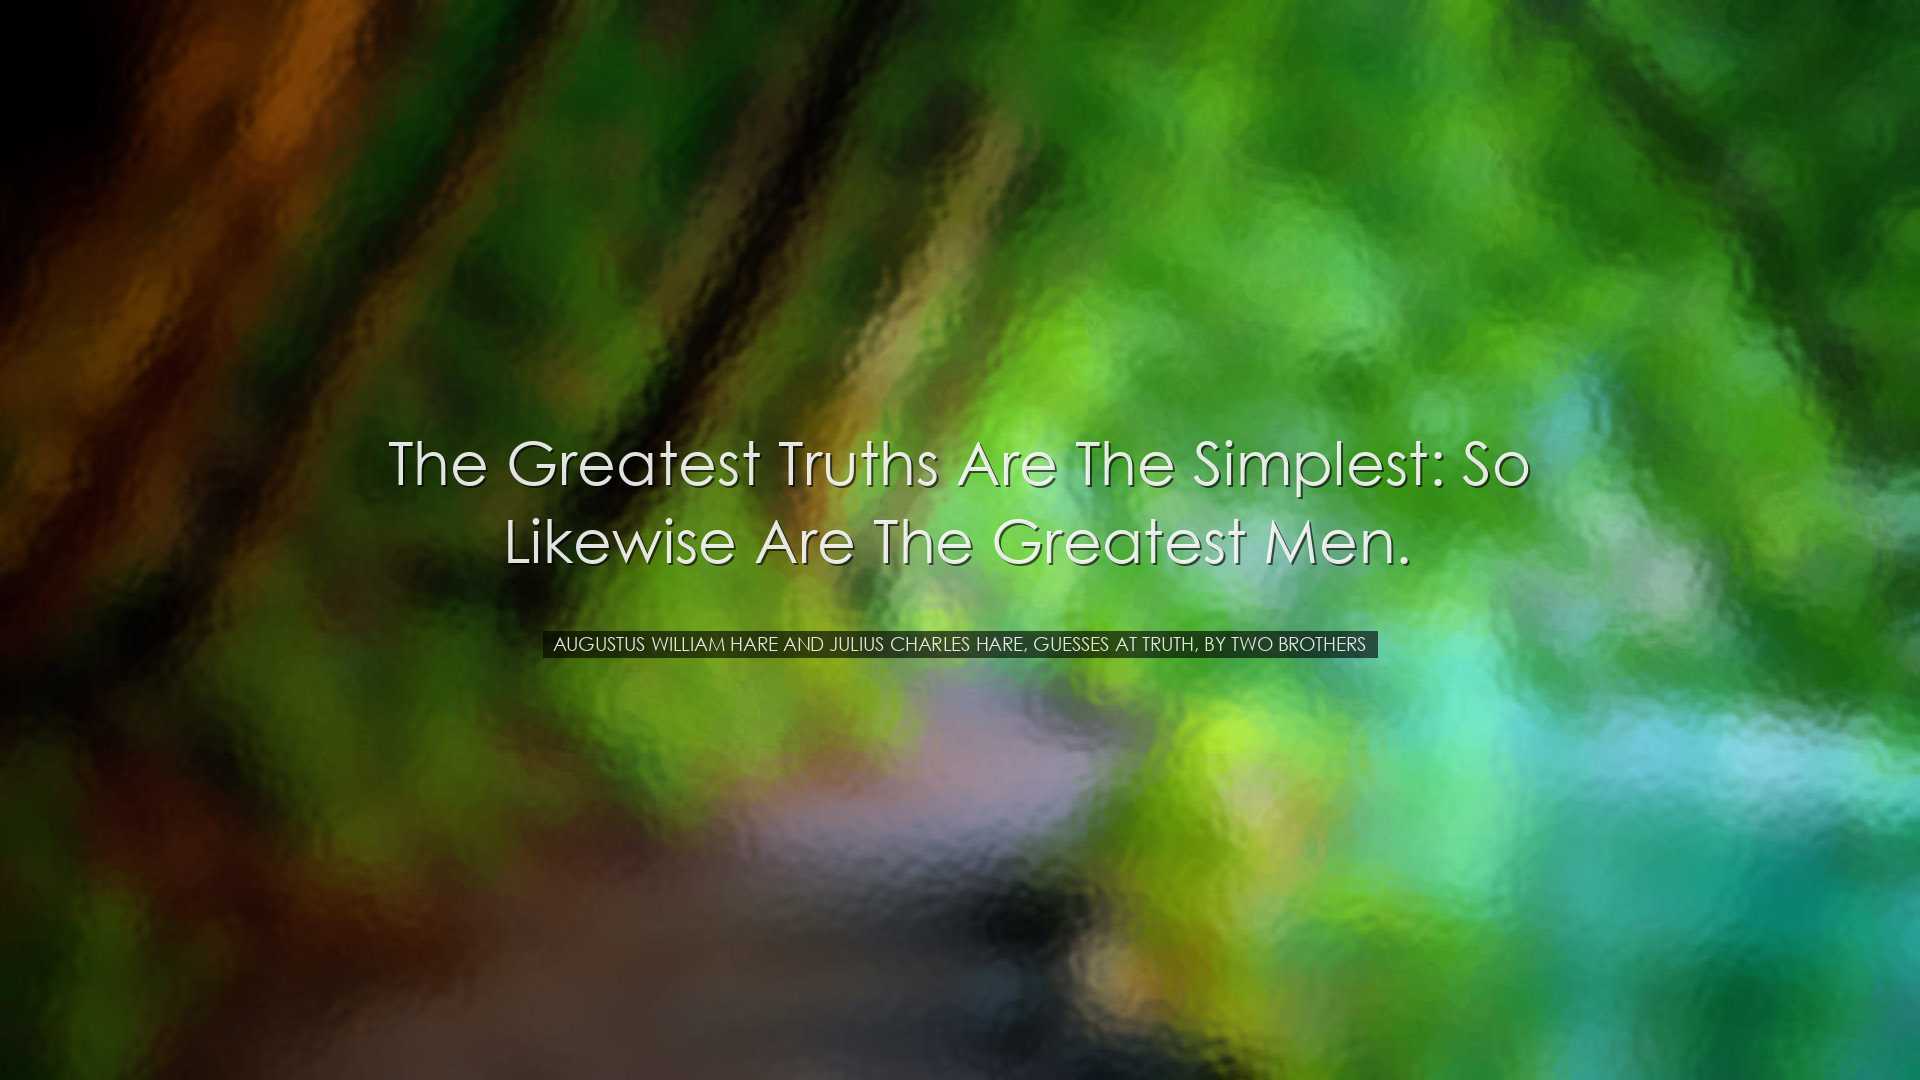 The greatest truths are the simplest: so likewise are the greatest